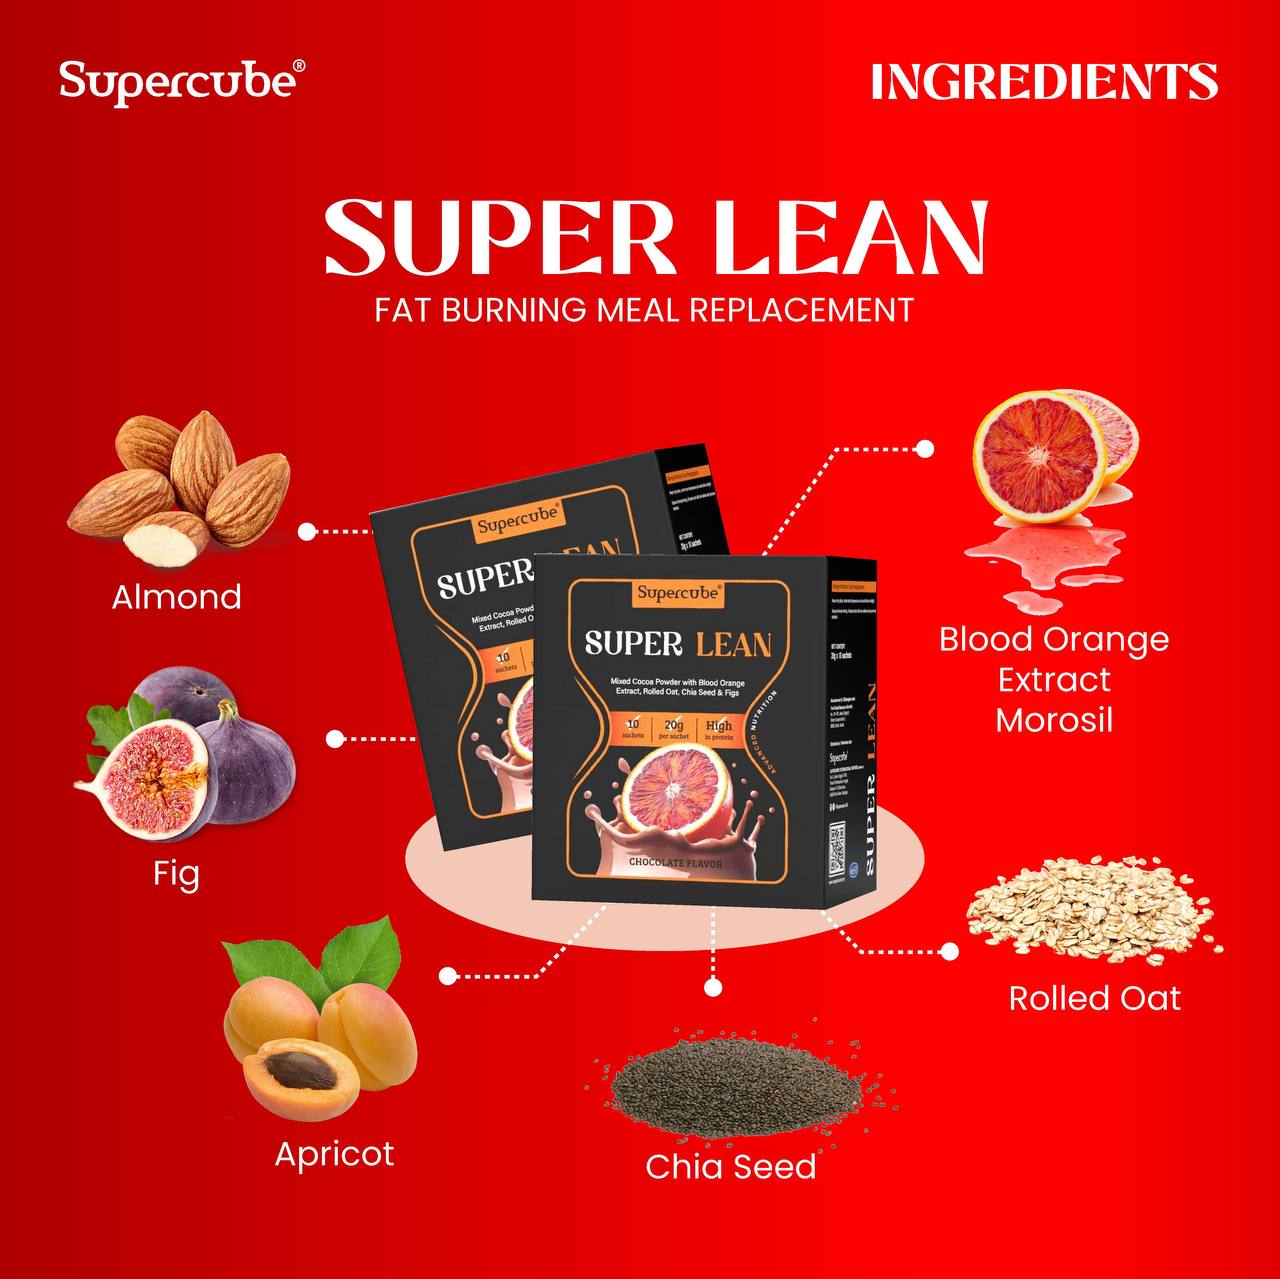 Super Lean Fat Burning Meal Replacement